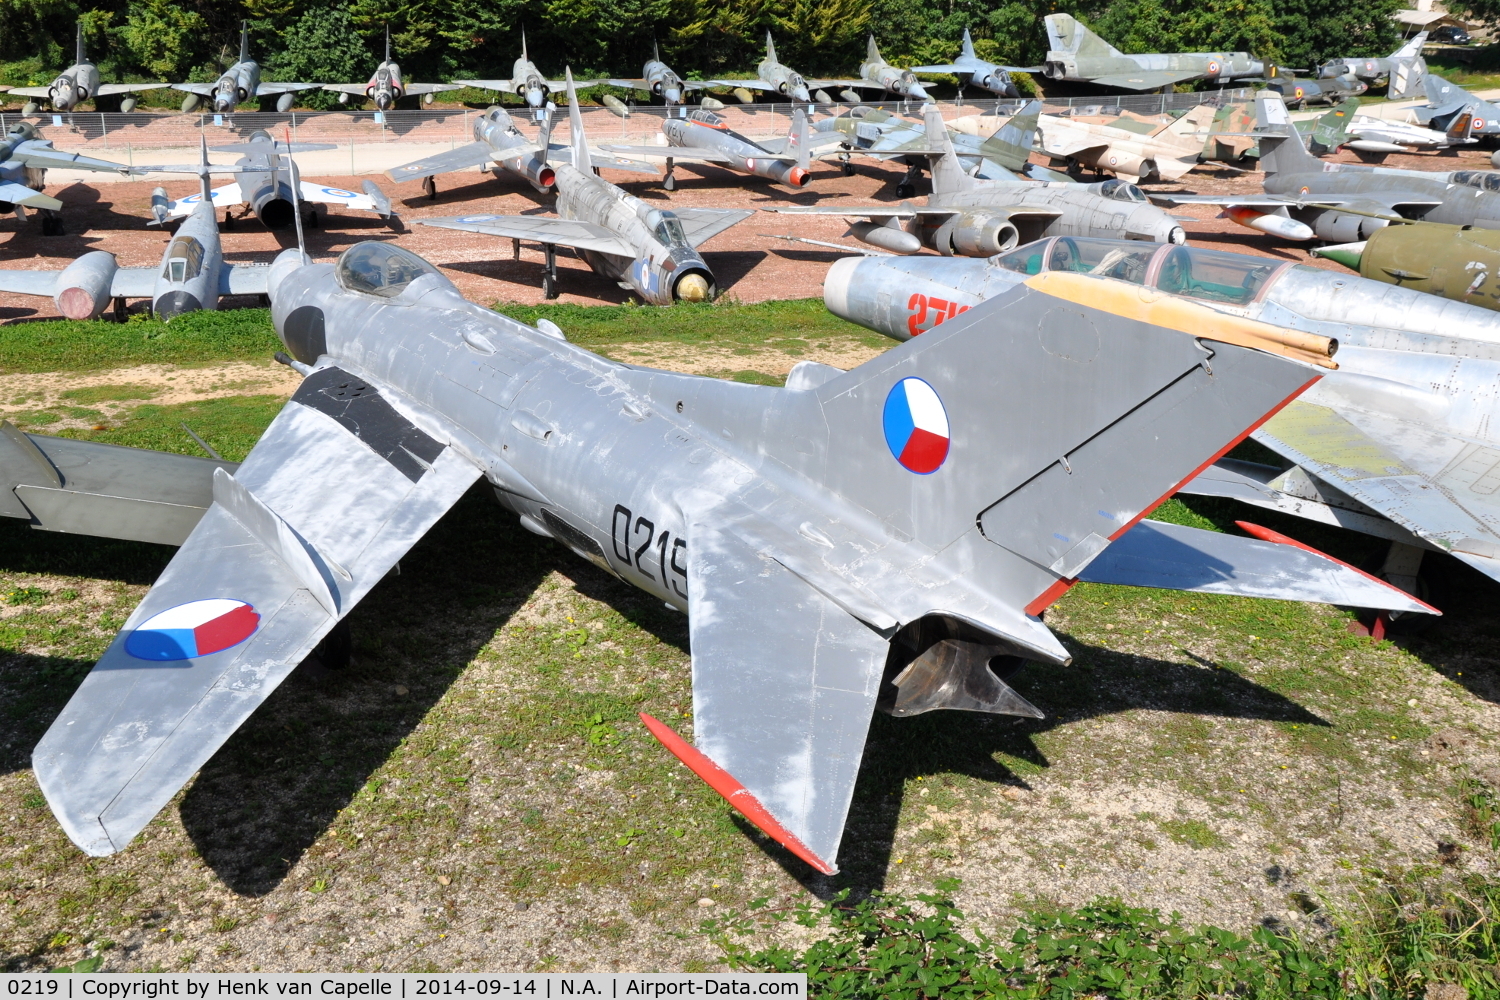 0219, Aero S-105 (MiG-19S) C/N 050219, MiG-19S fighter of the Czechoslovak Air Force preserved at the Chateau de Savigny aircraft museum.